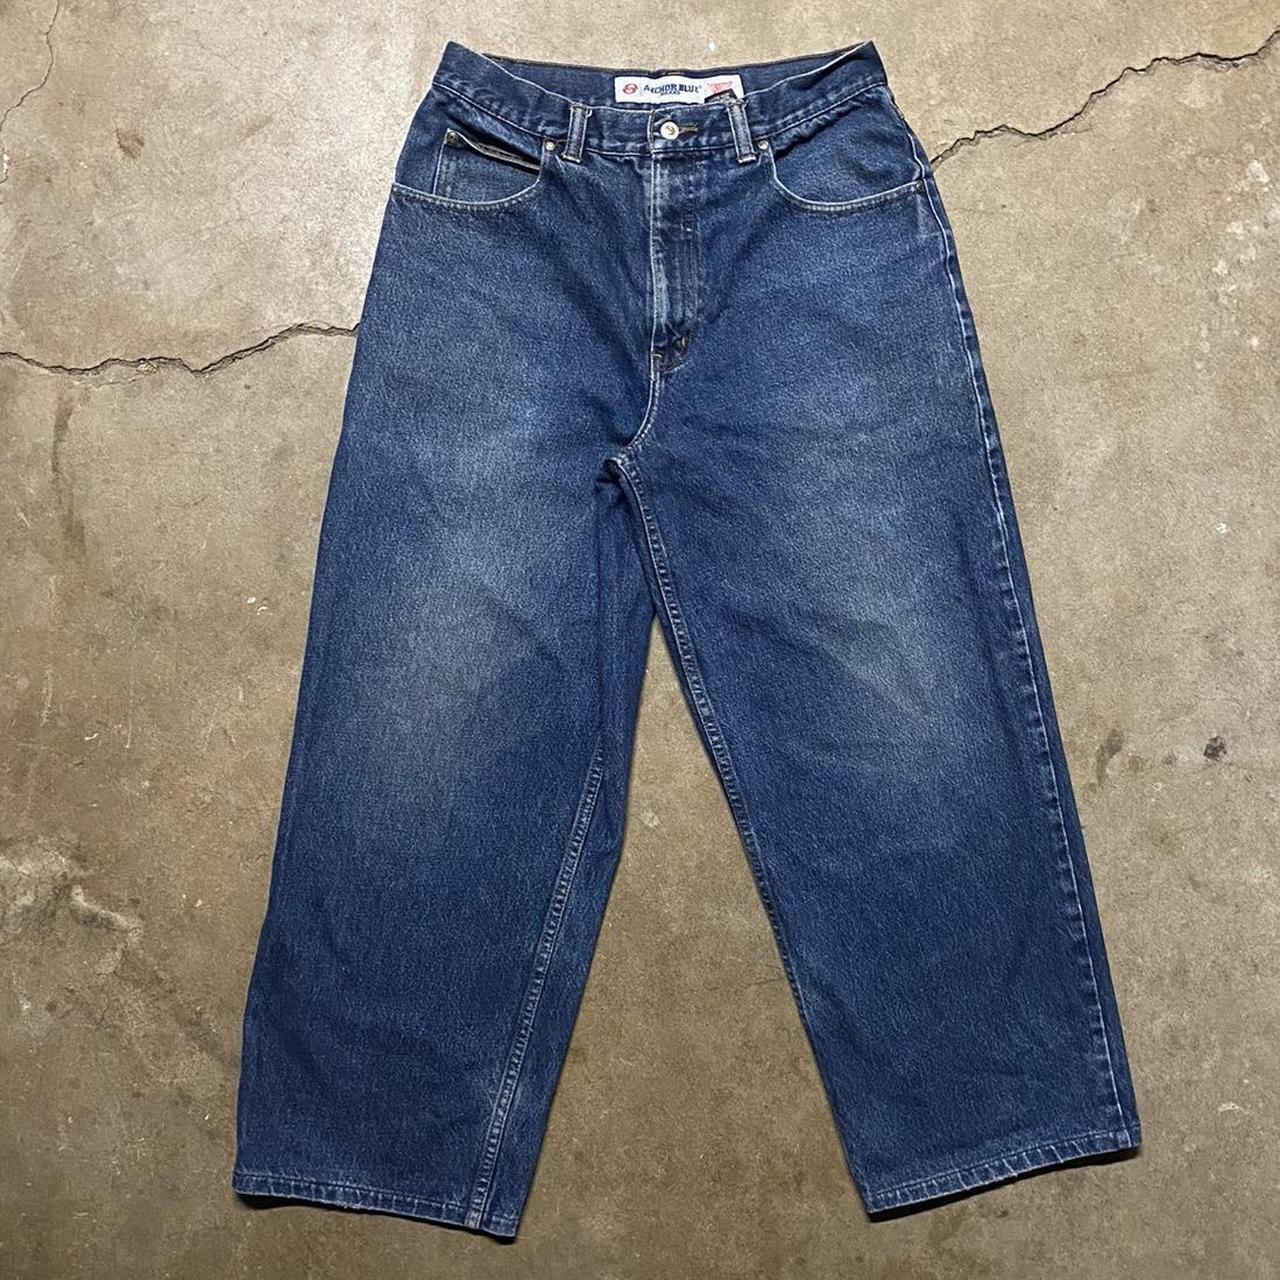 Vintage Early 2000s Beyond Baggy Anchor Blue Jeans... - Depop